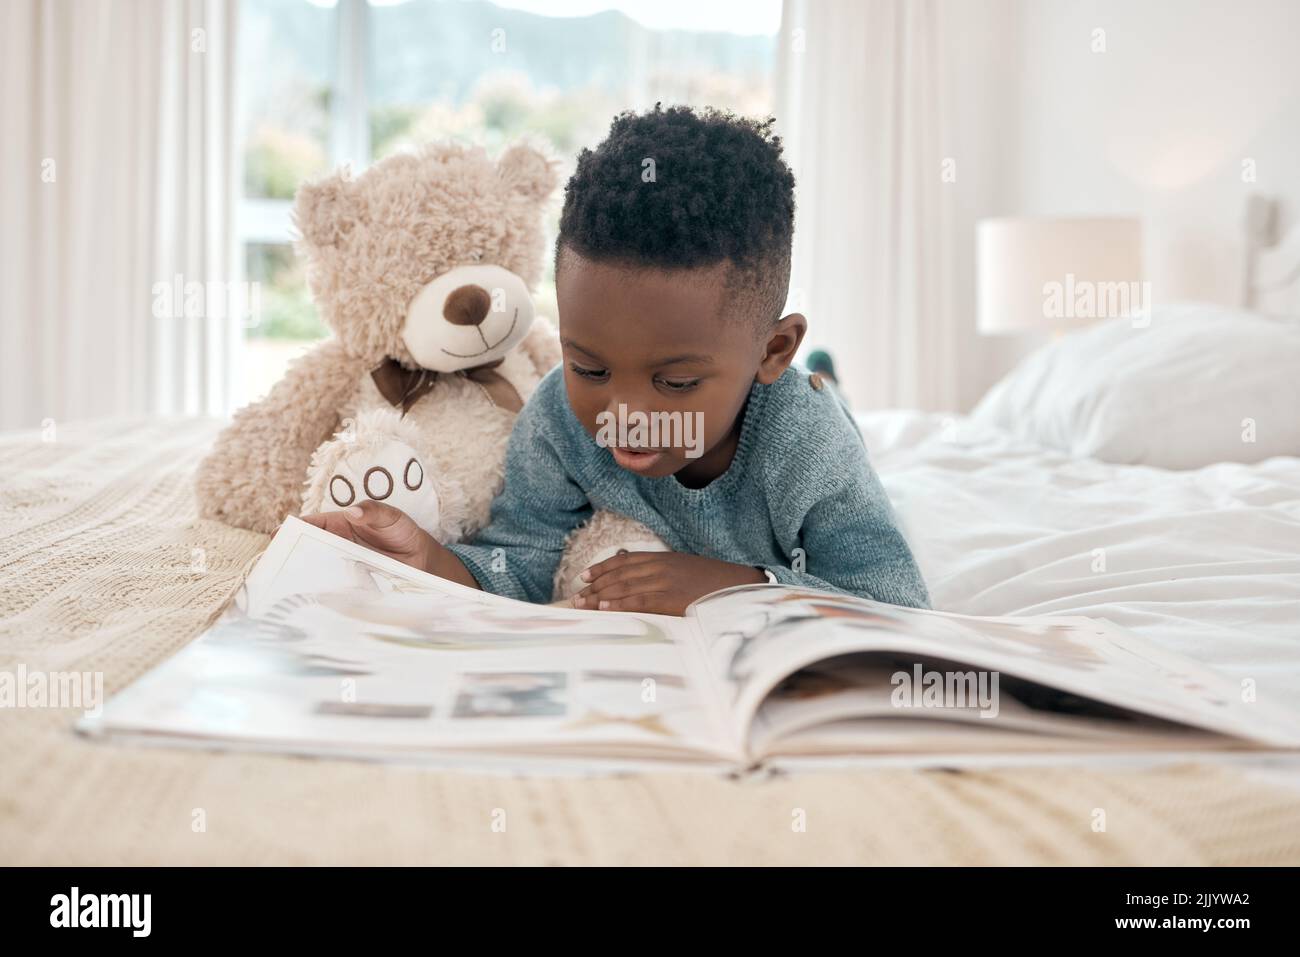 Broadening his imagination. Full length shot of an adorable little boy reading a book on a bed at home. Stock Photo